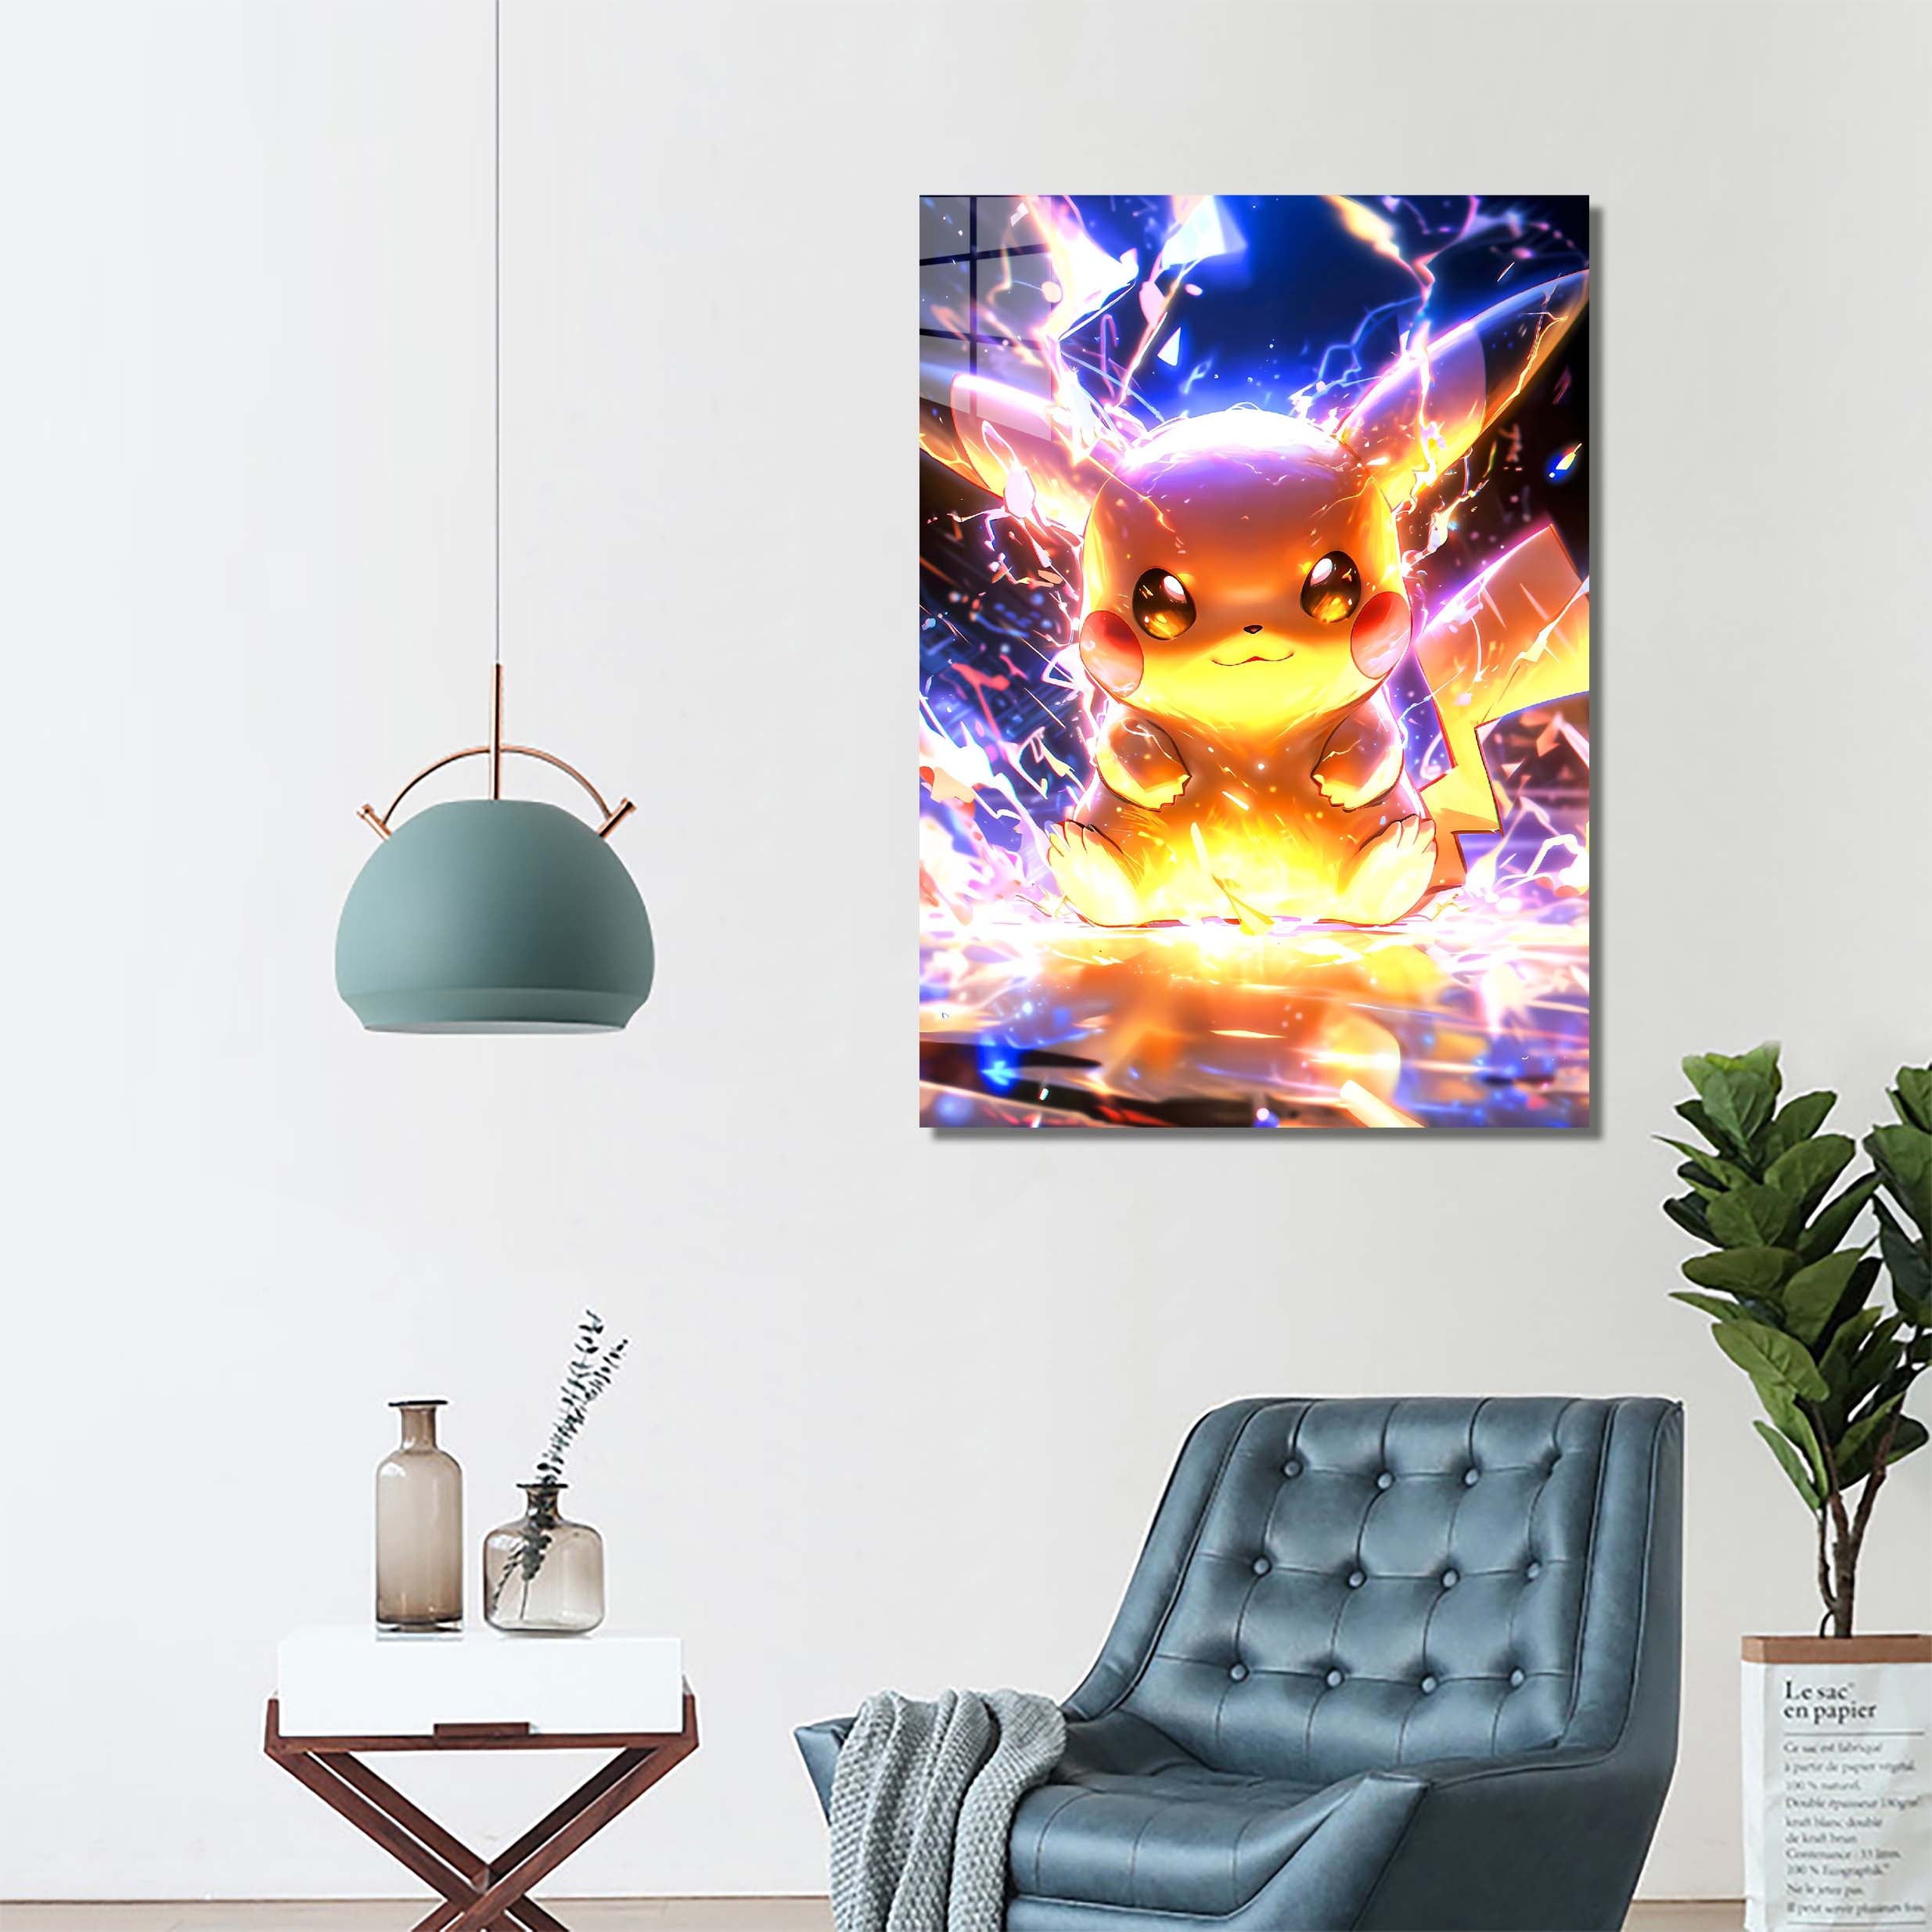 Pikachu Cute Poster-designed by @Freiart_mjr